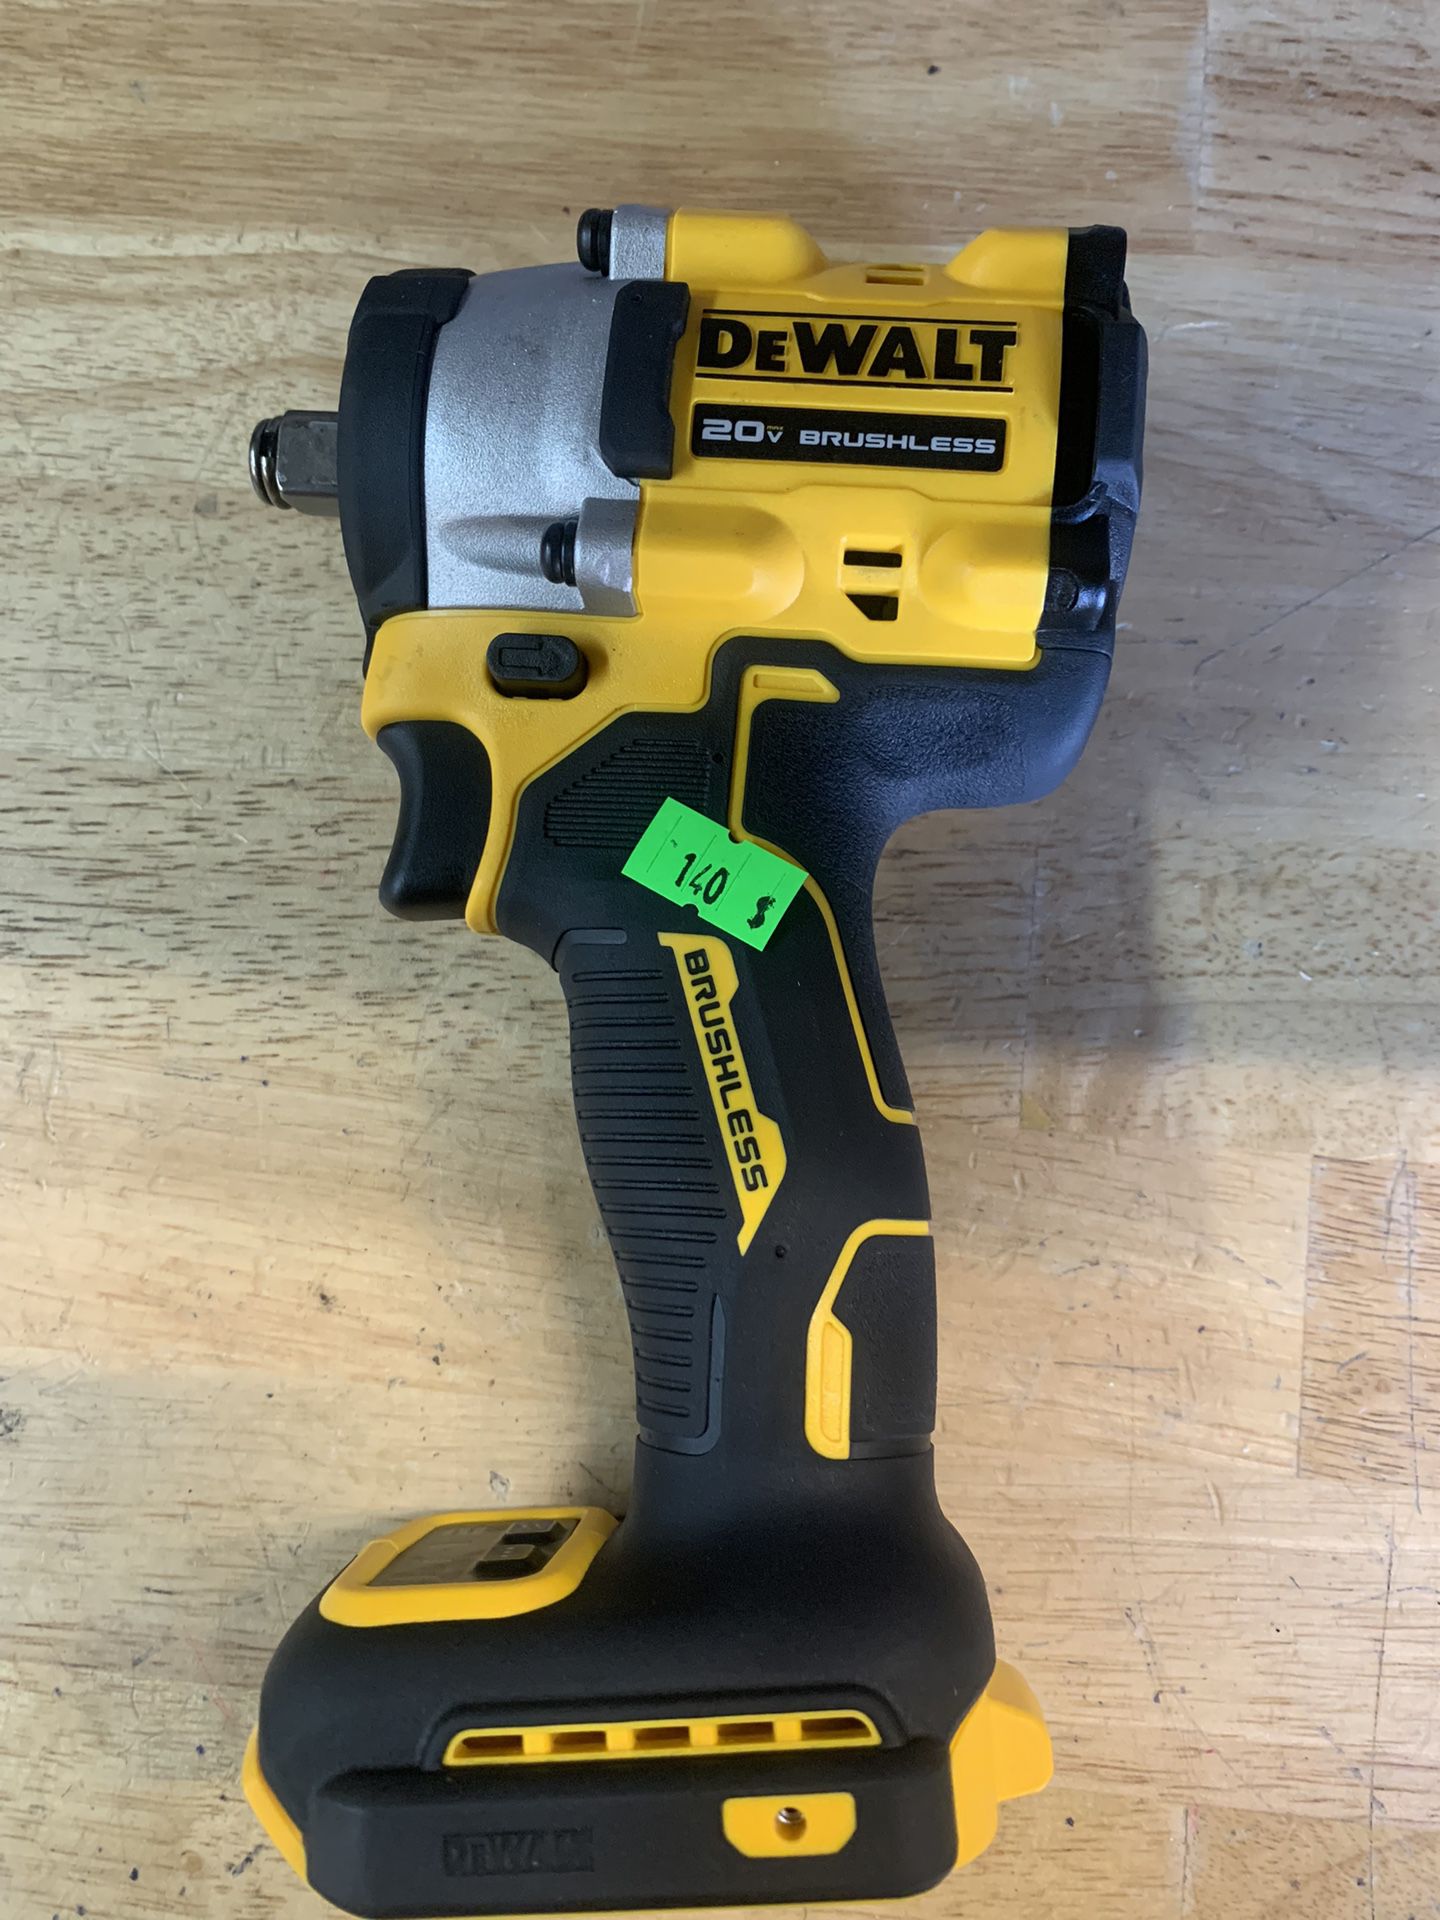 Dewalt 20V Lithium-Ion Cordless Compact 1/2 in. Impact Wrench